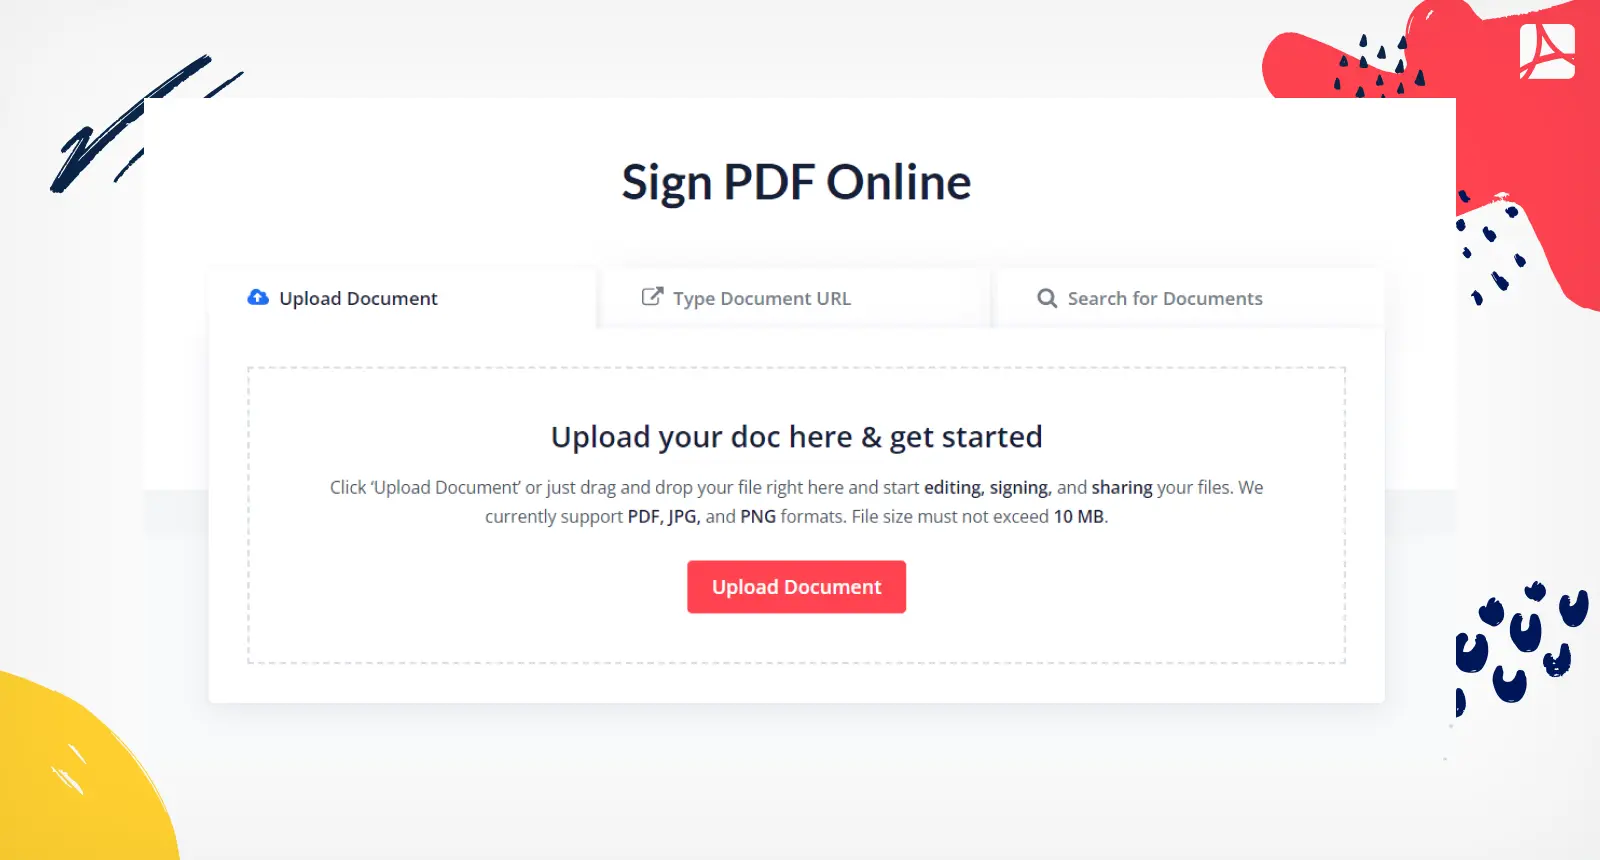 Sign PDFs Online